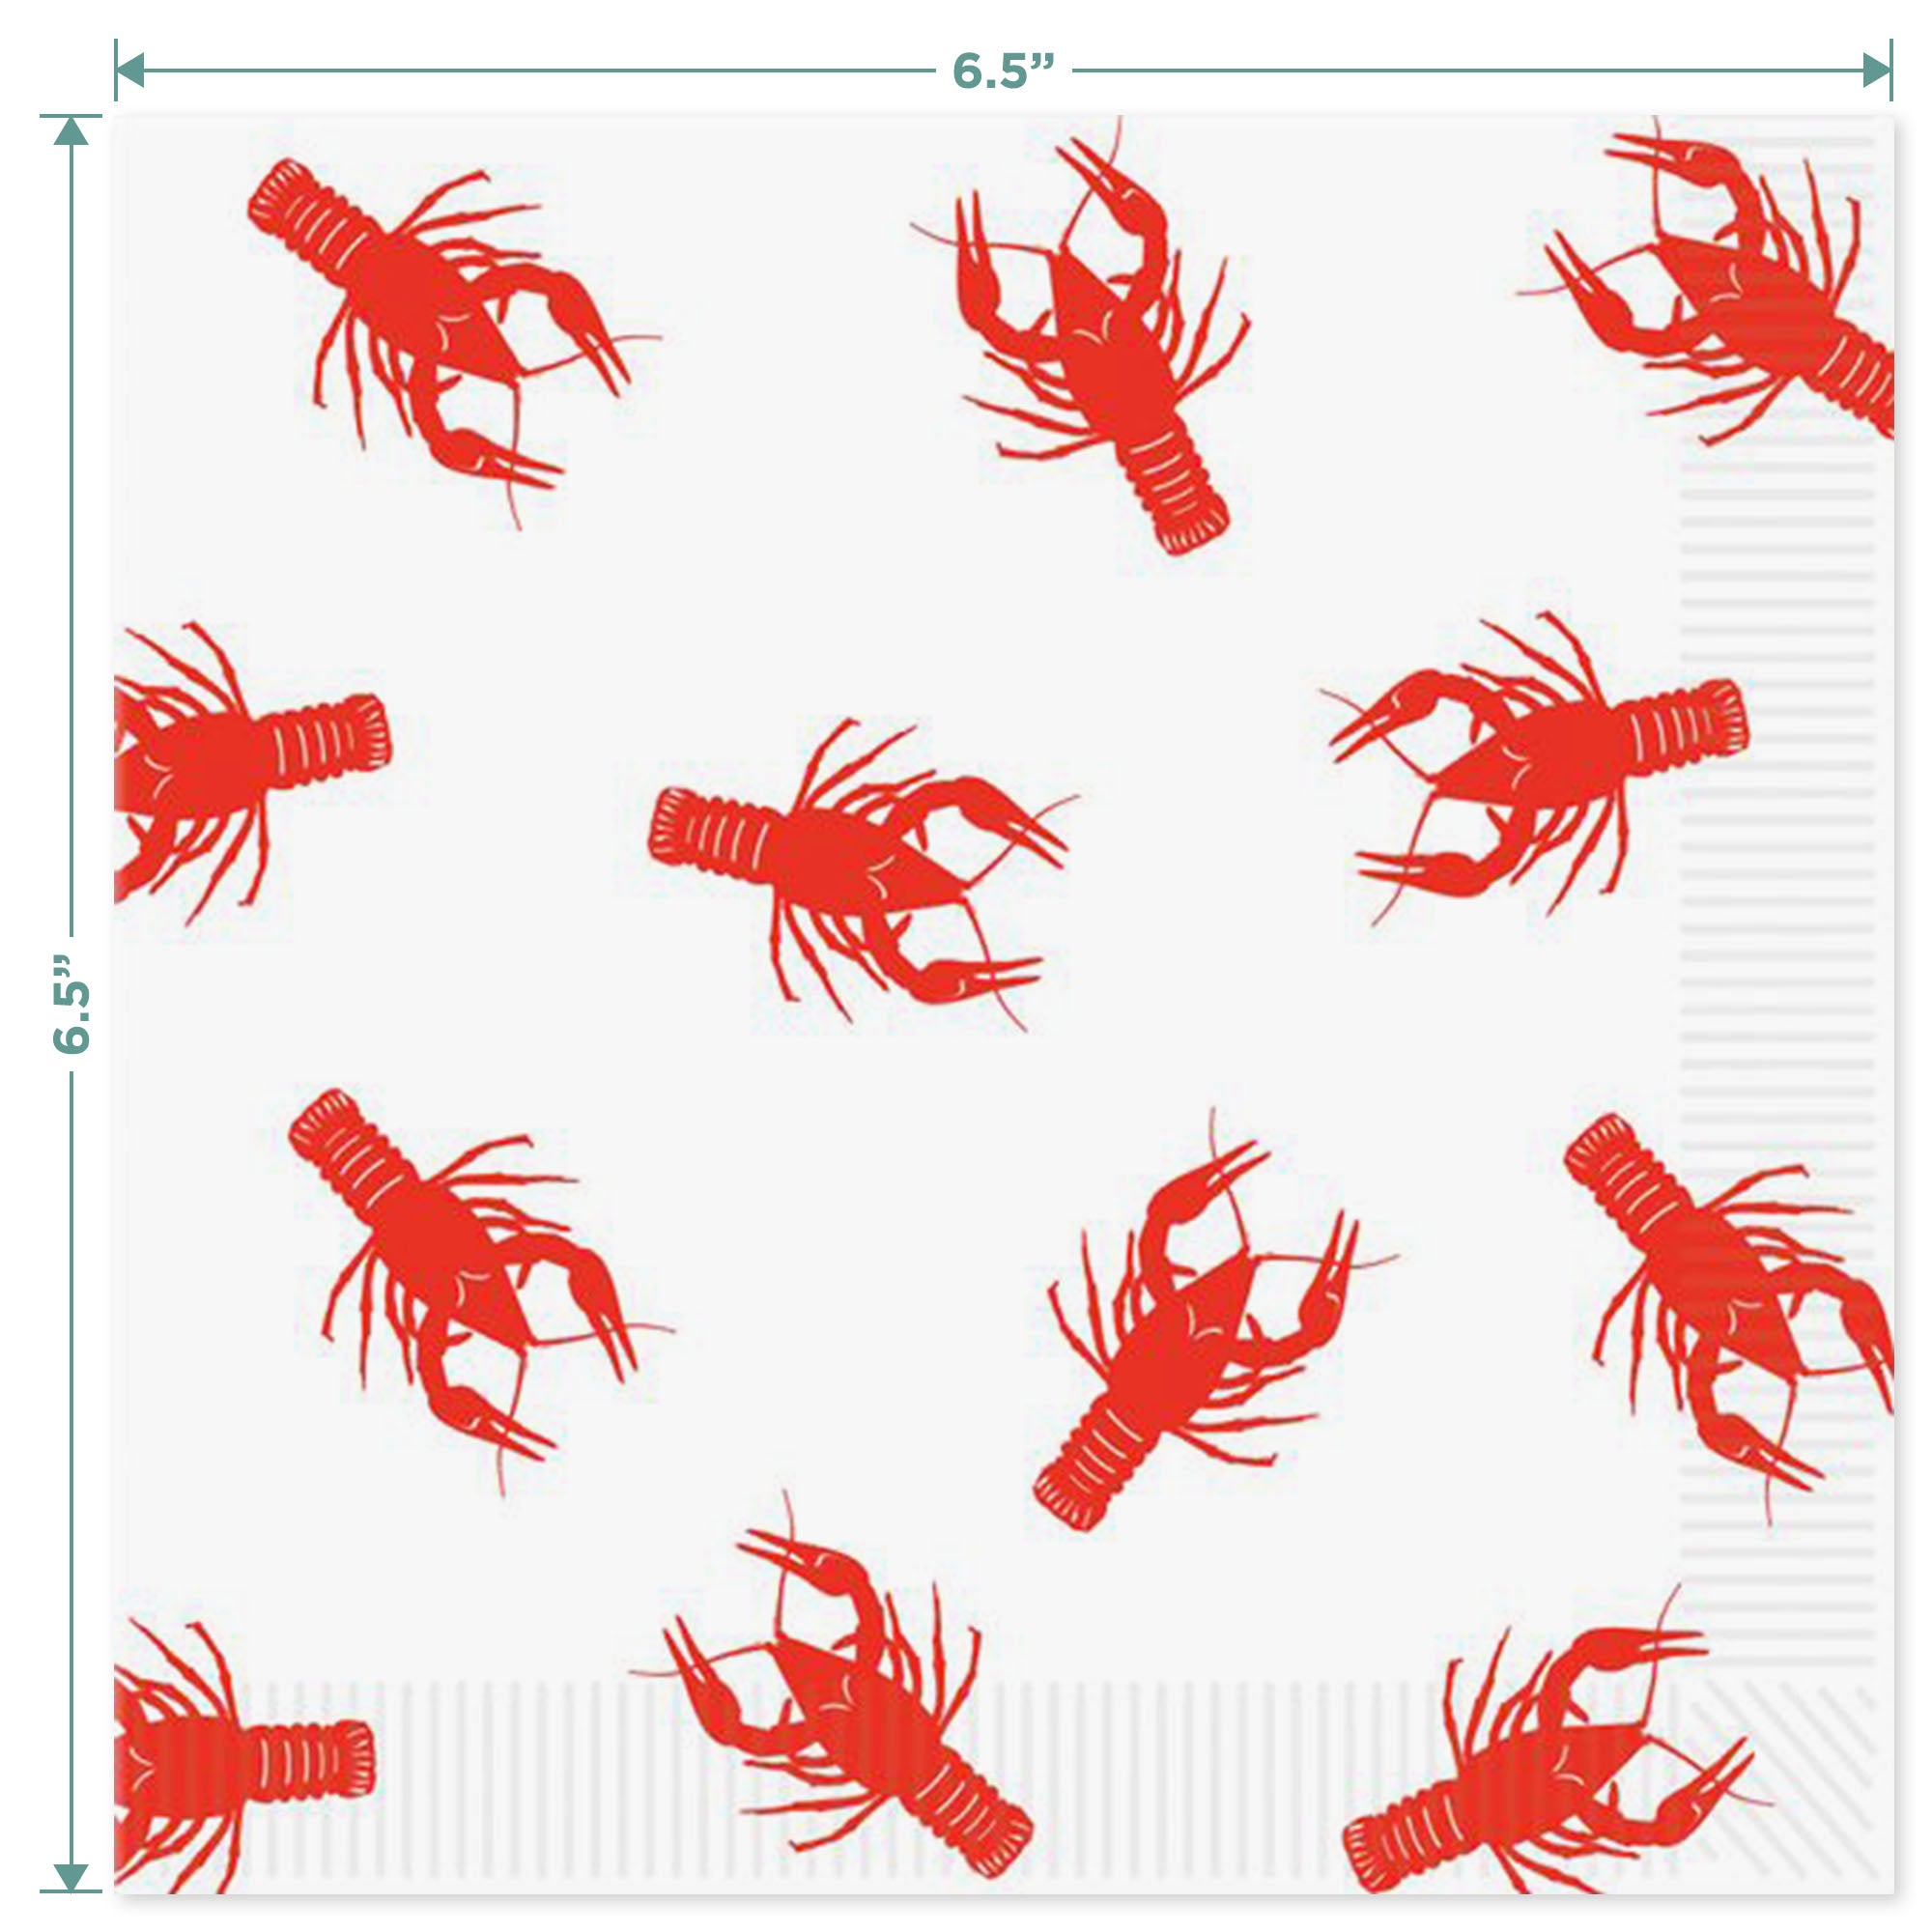  Xigejob Crawfish Boil Plates And Napkins Party Supplies - Lobster  Party Tableware Decorations, Plate, Cup, Napkin, Crayfish Crab Shrimp  Seafood Boil Party Supplies For Birthday Baby Shower